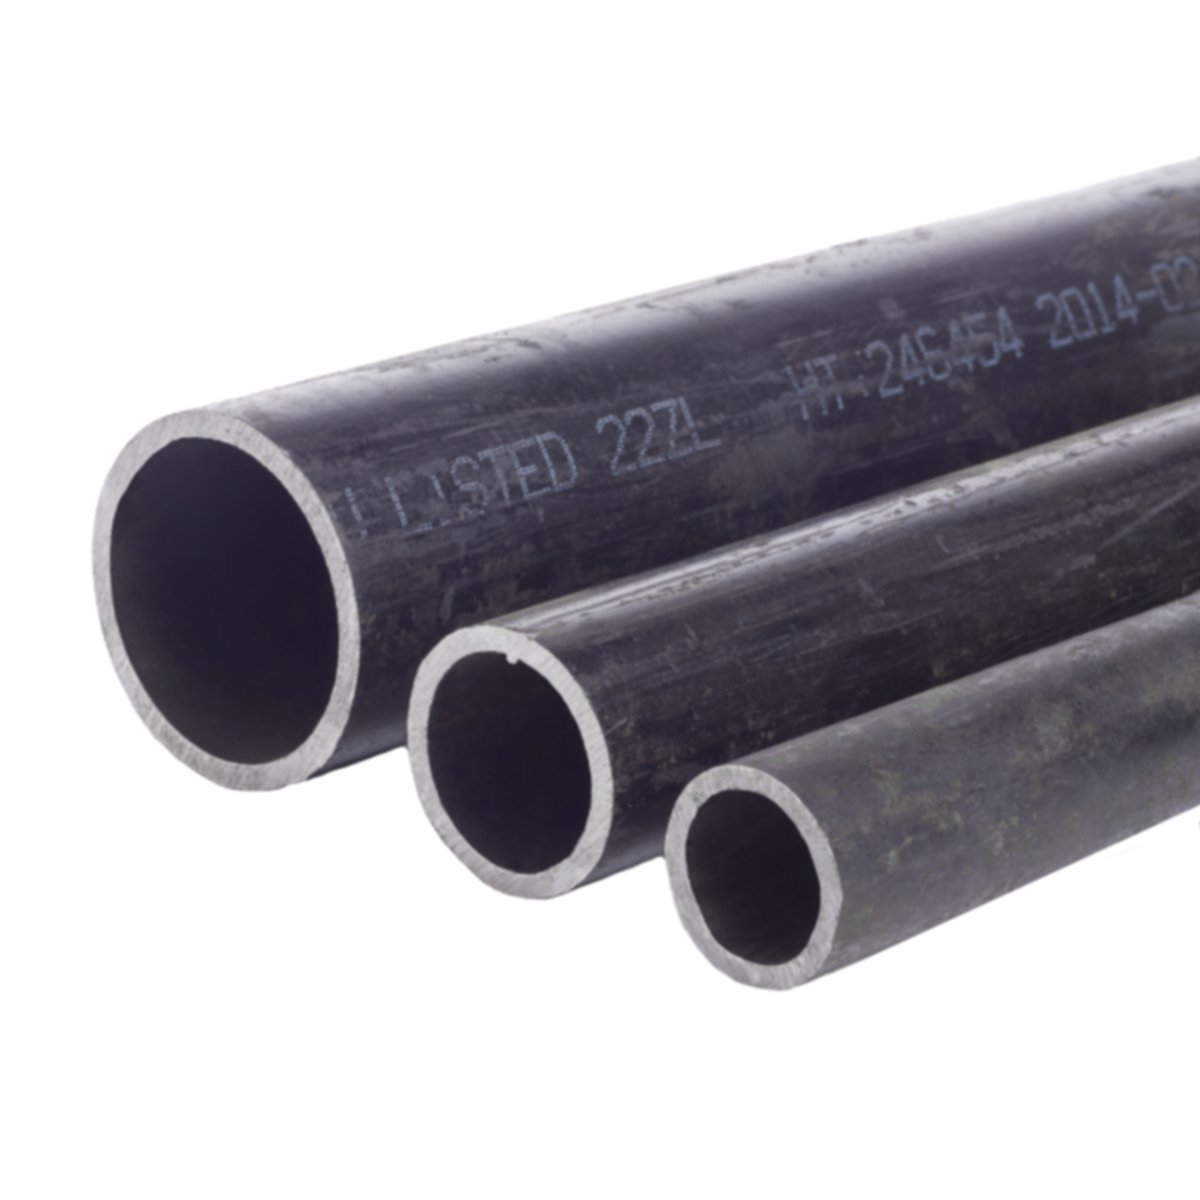 Carbon round tube -PULLWINDING- (0 16/ 12) x 1500 mm, Carbon round tube  -PULLWINDING- (0 16/ 12) x 1500 mm